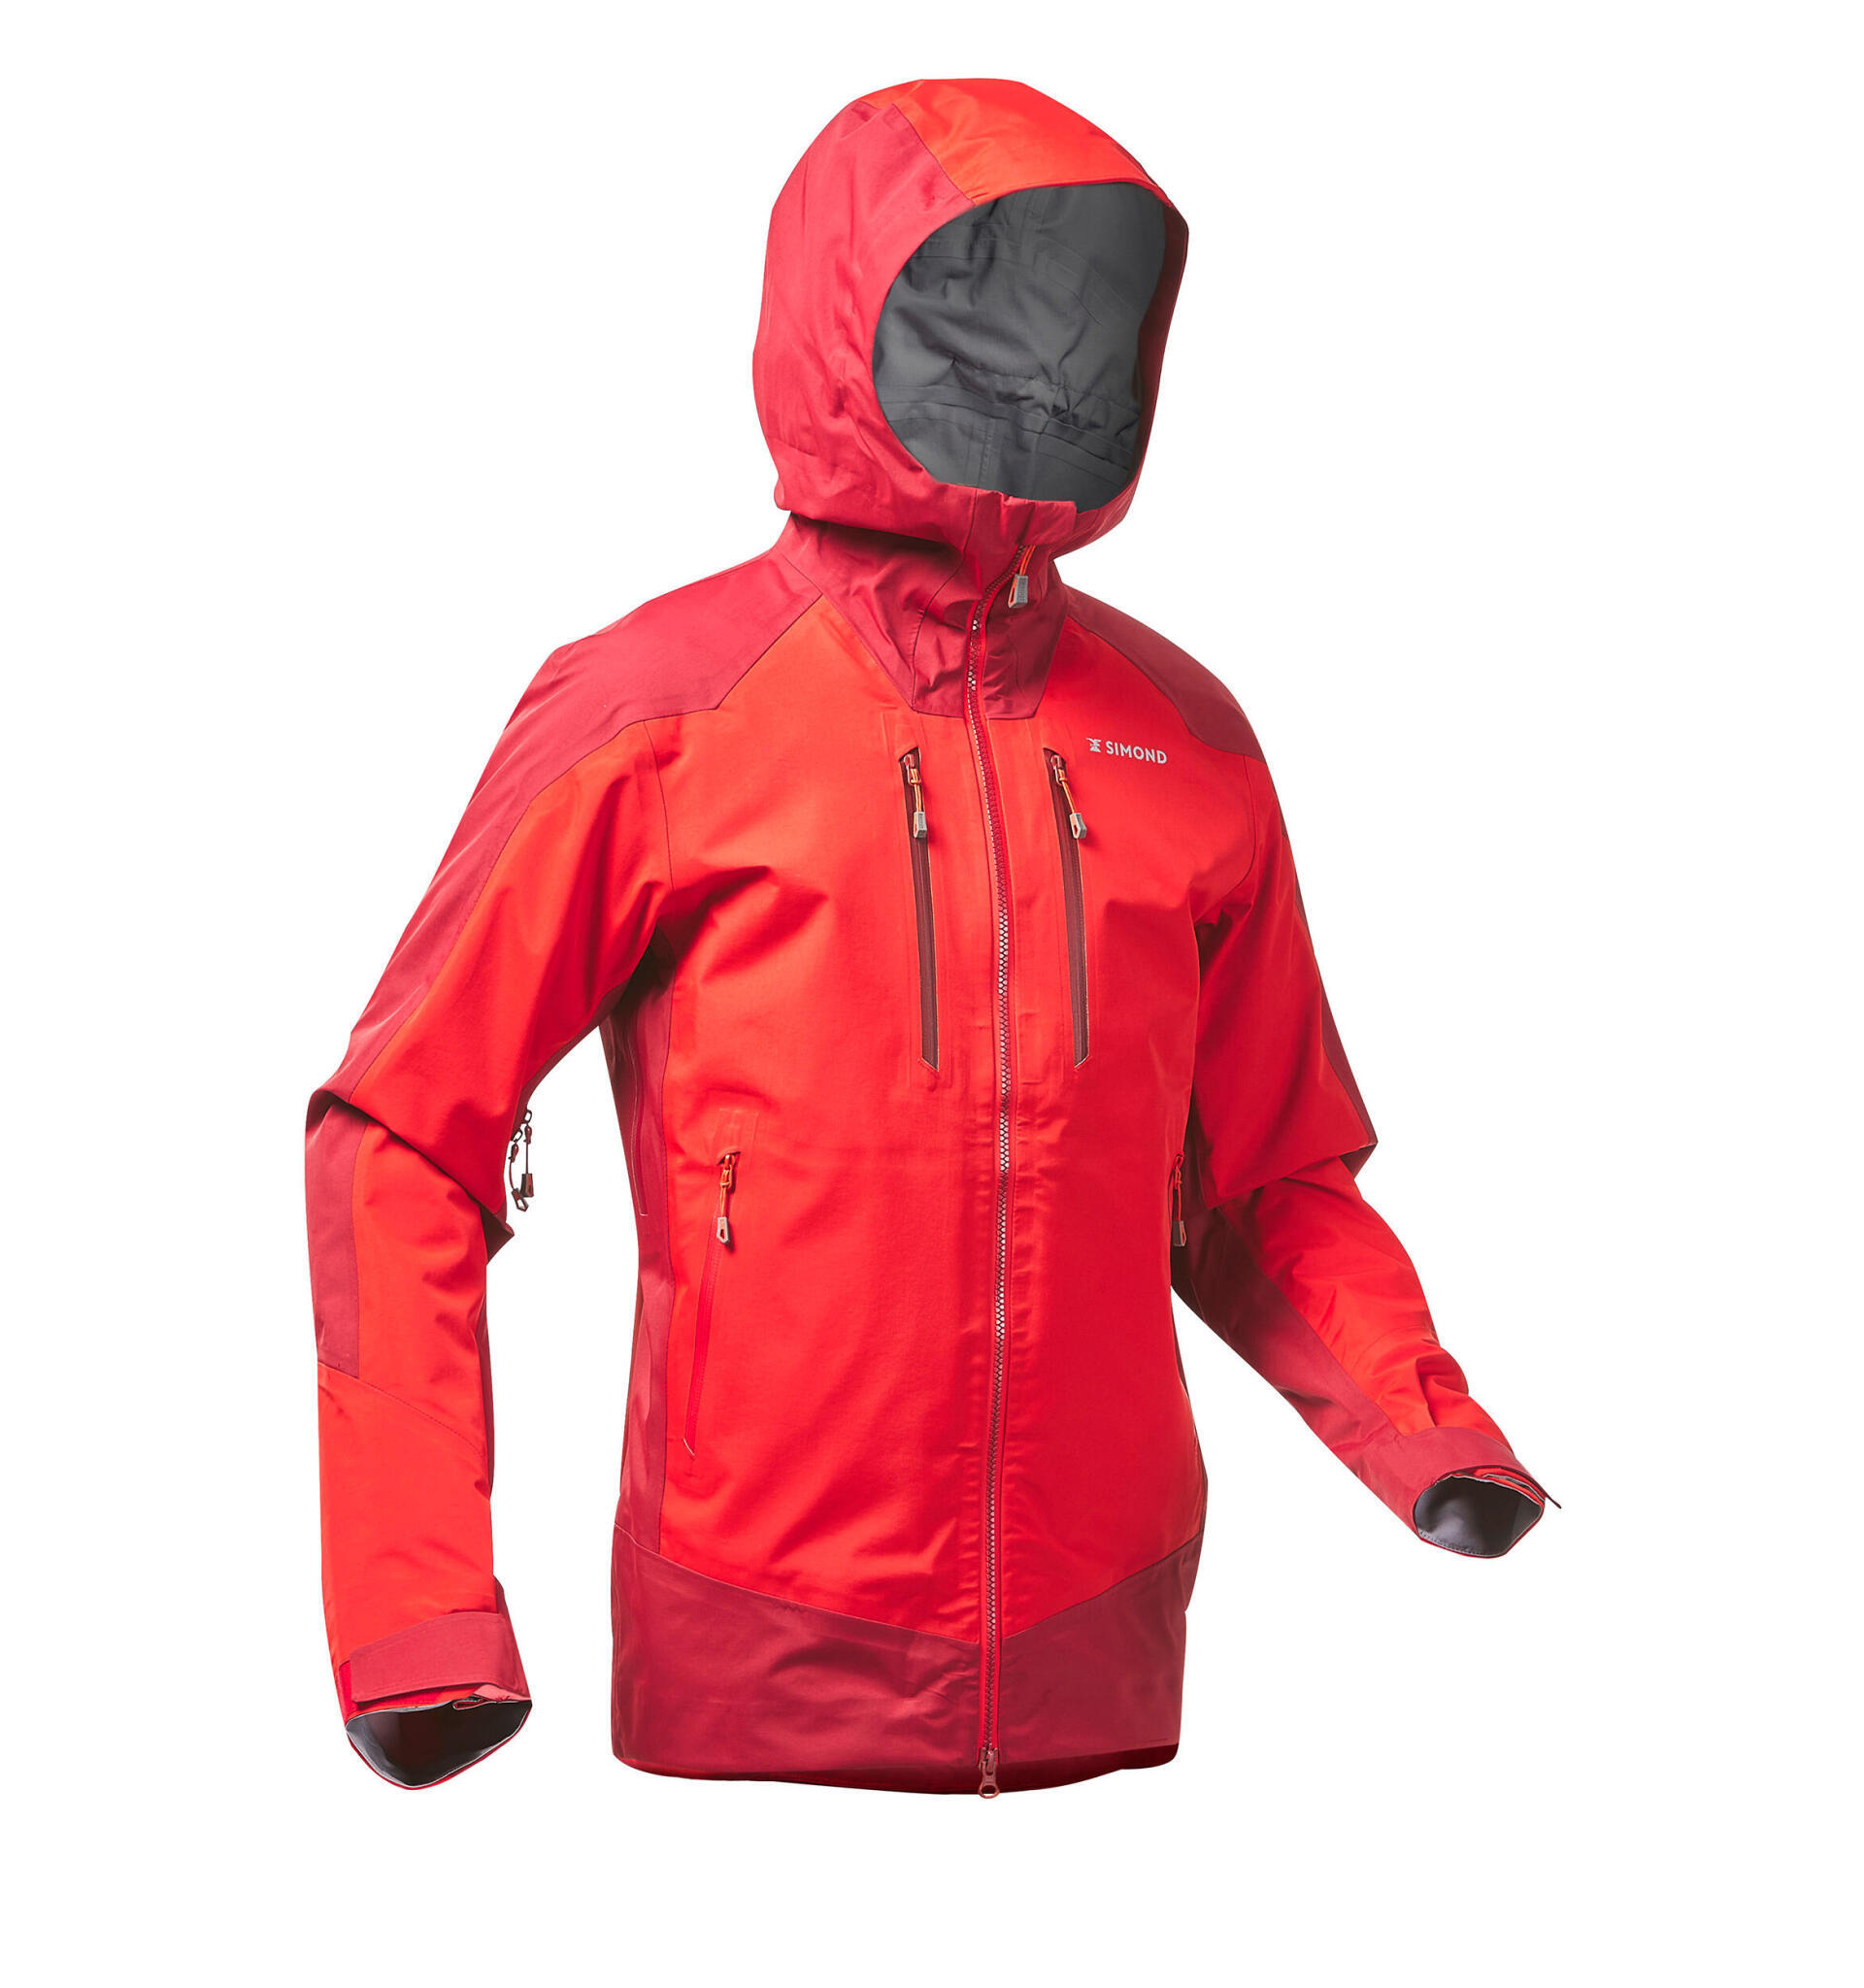 Performance pack - winter mountaineering, ice climbing and gullying